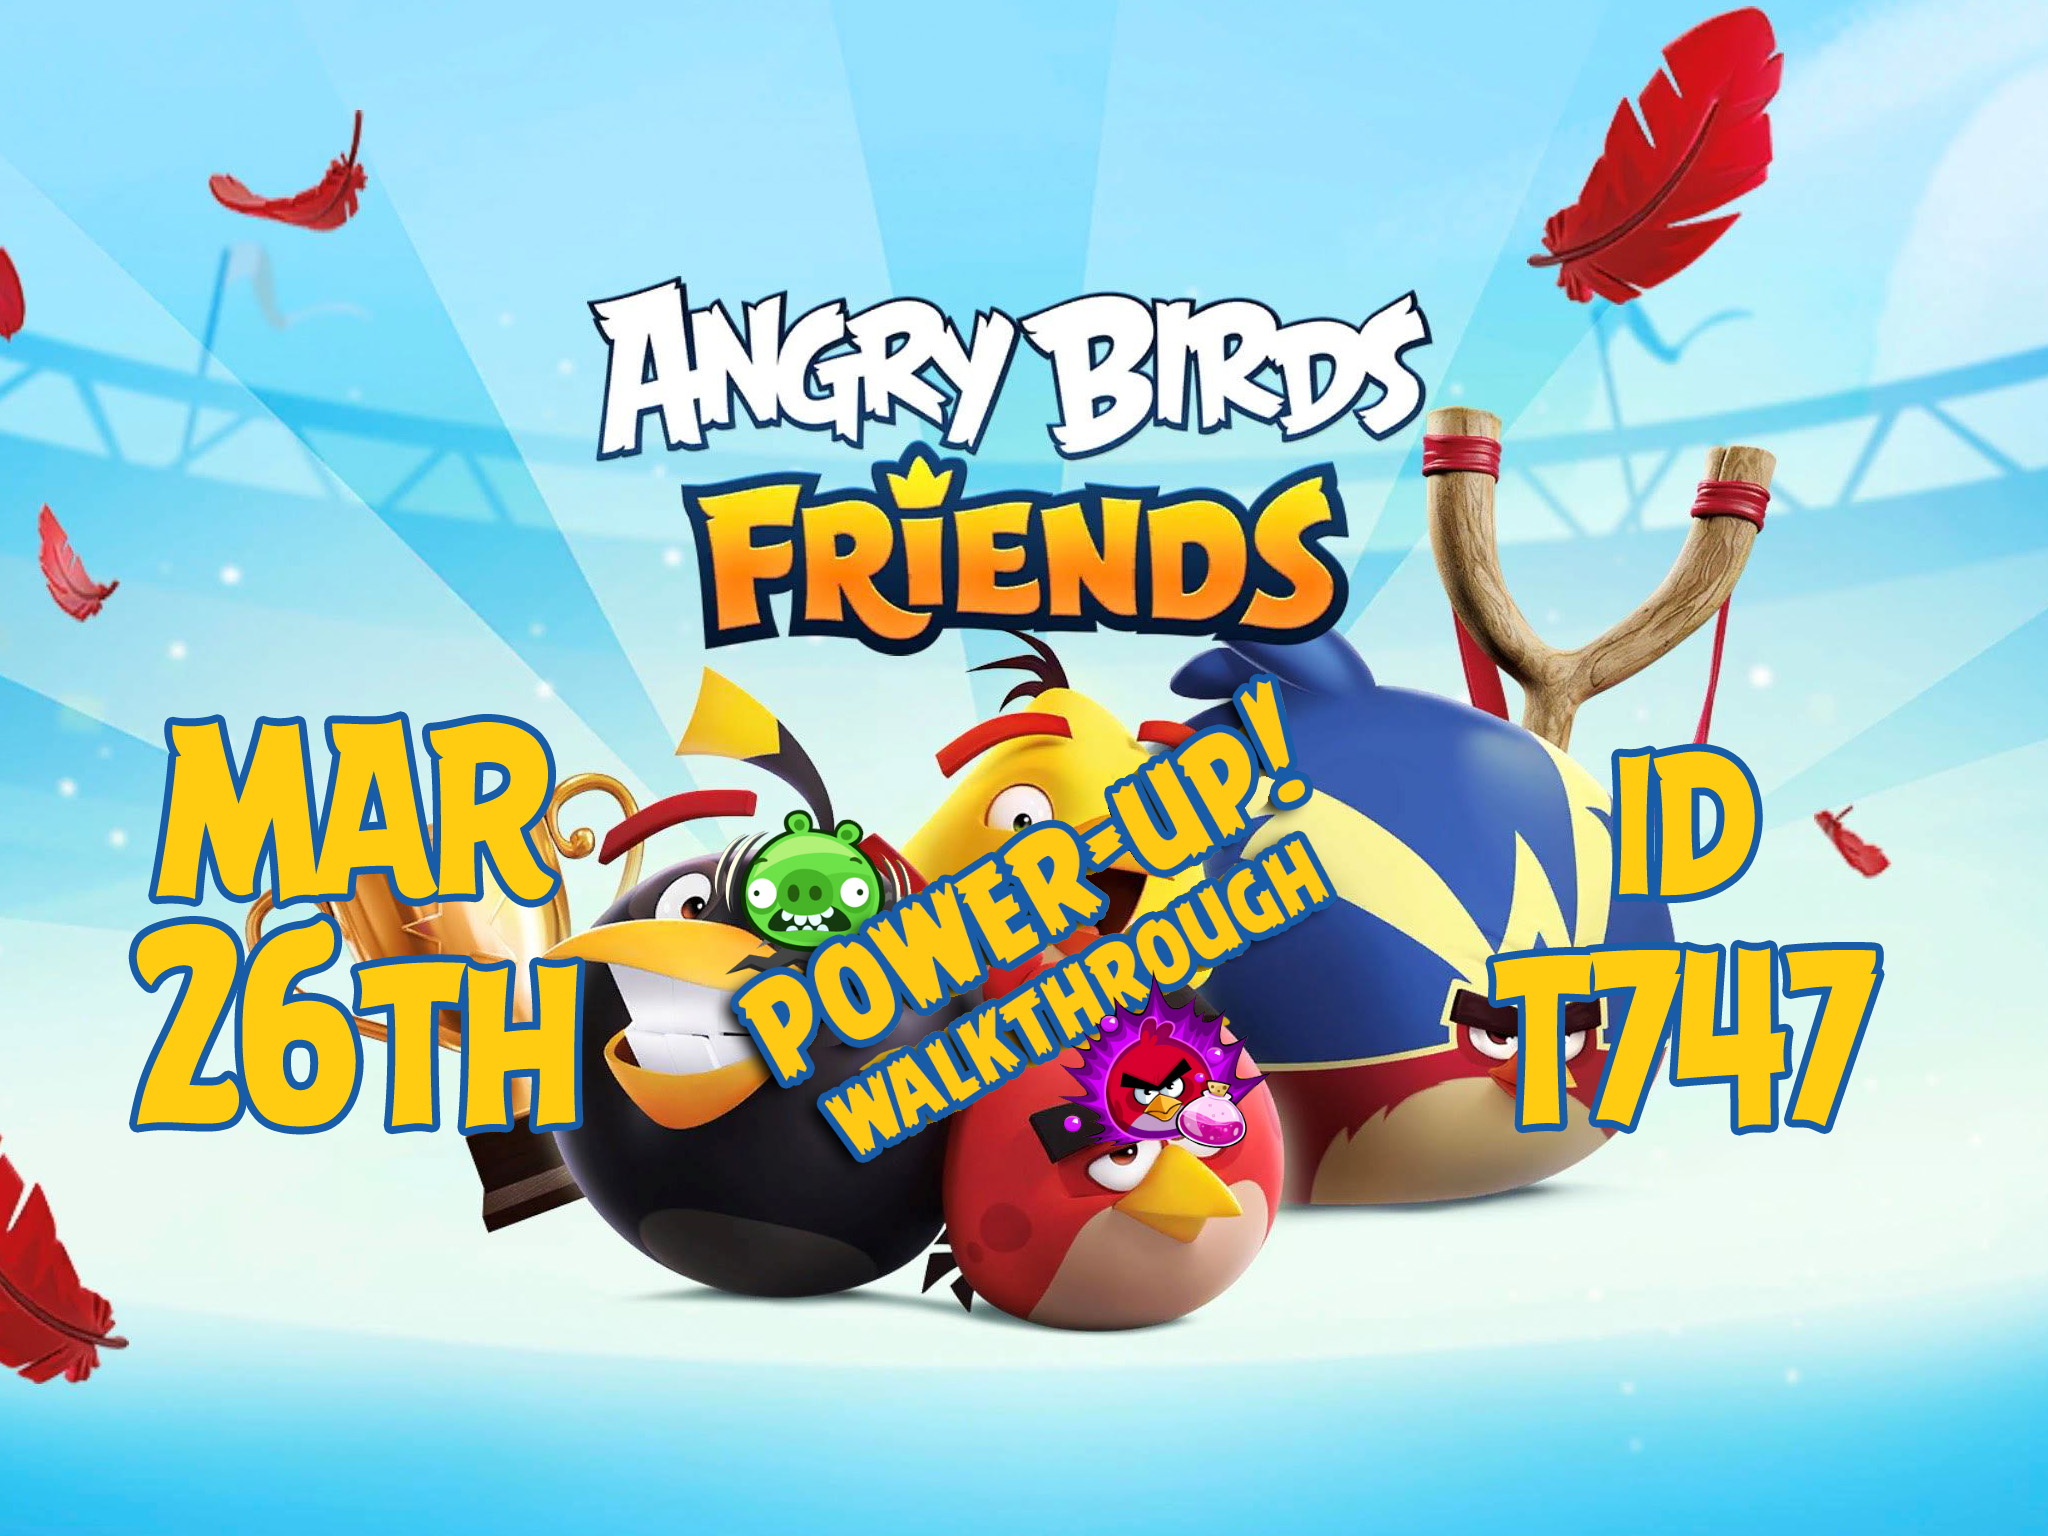 Angry-Birds-Friends-Tournament-T747-Feature-Image-PU